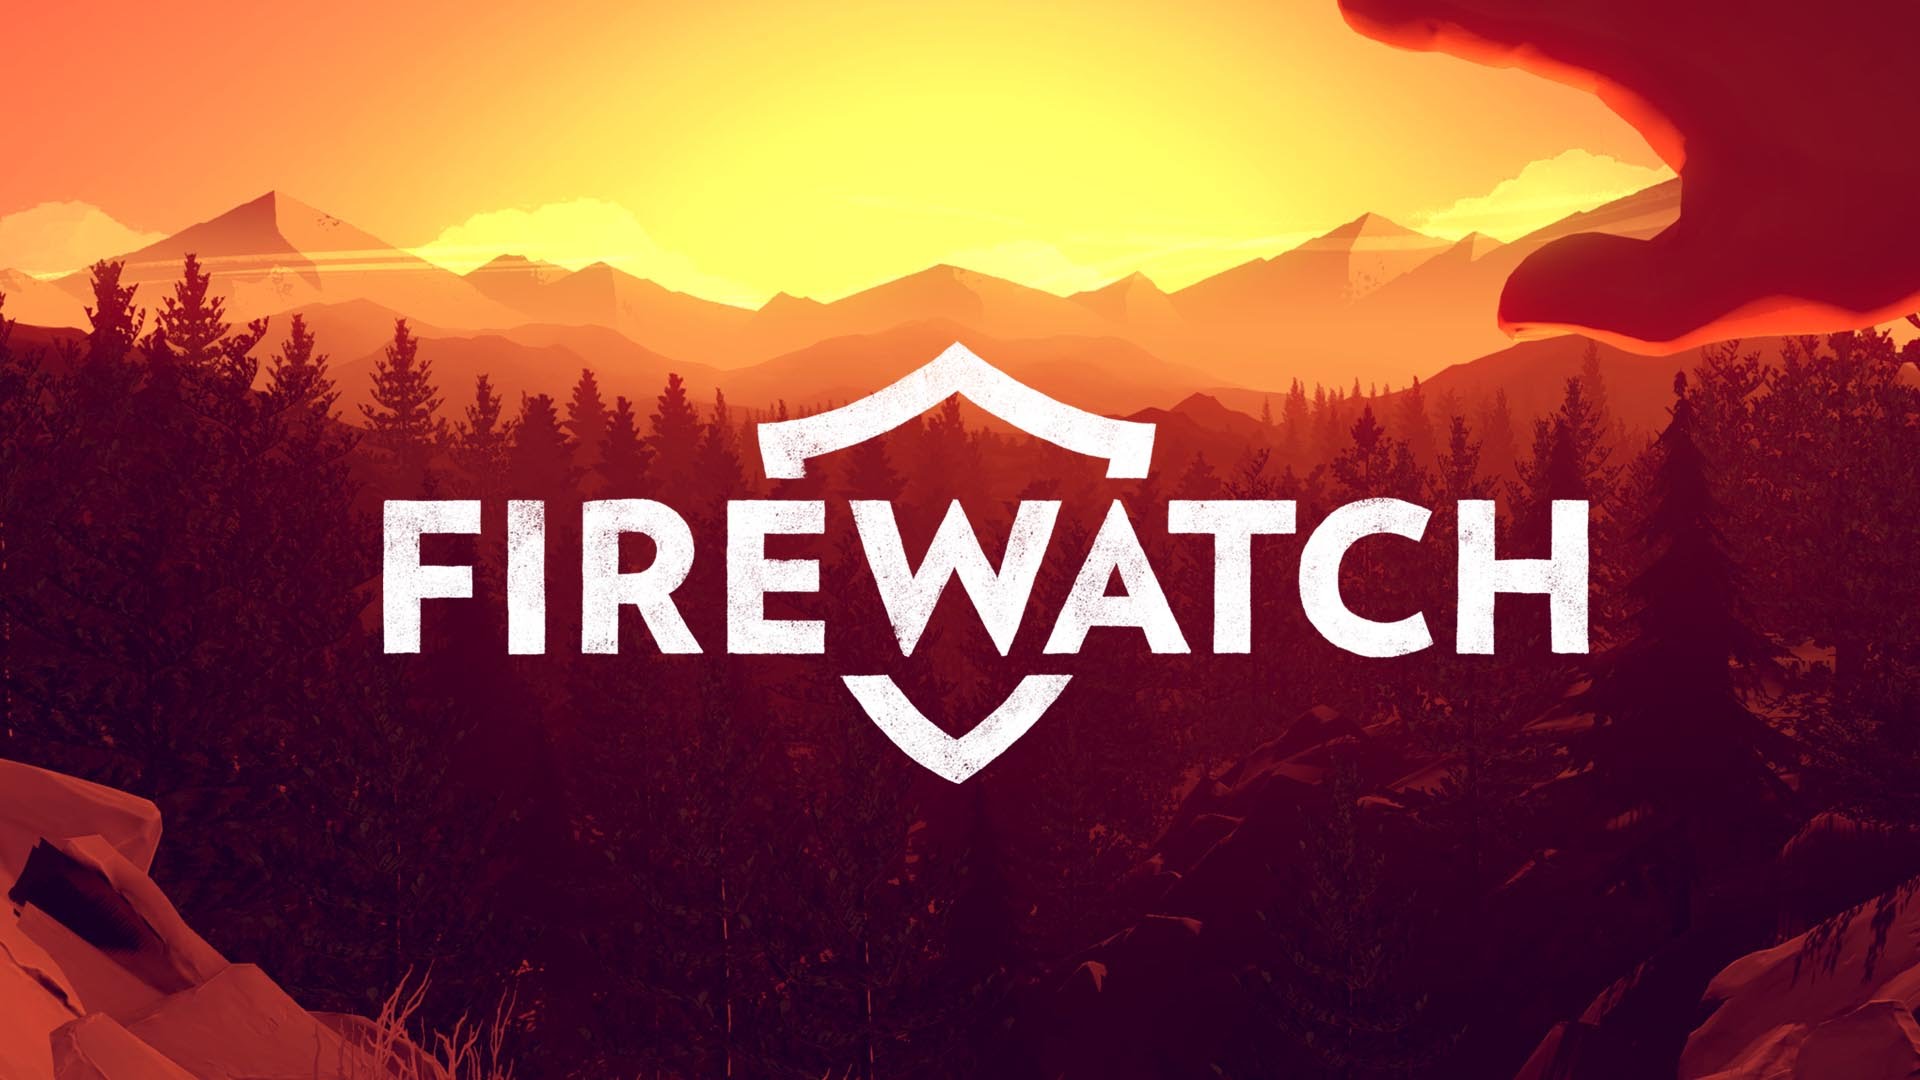 The SideQuest February 19, 2016: Firewatch, The Division and the Price of VR